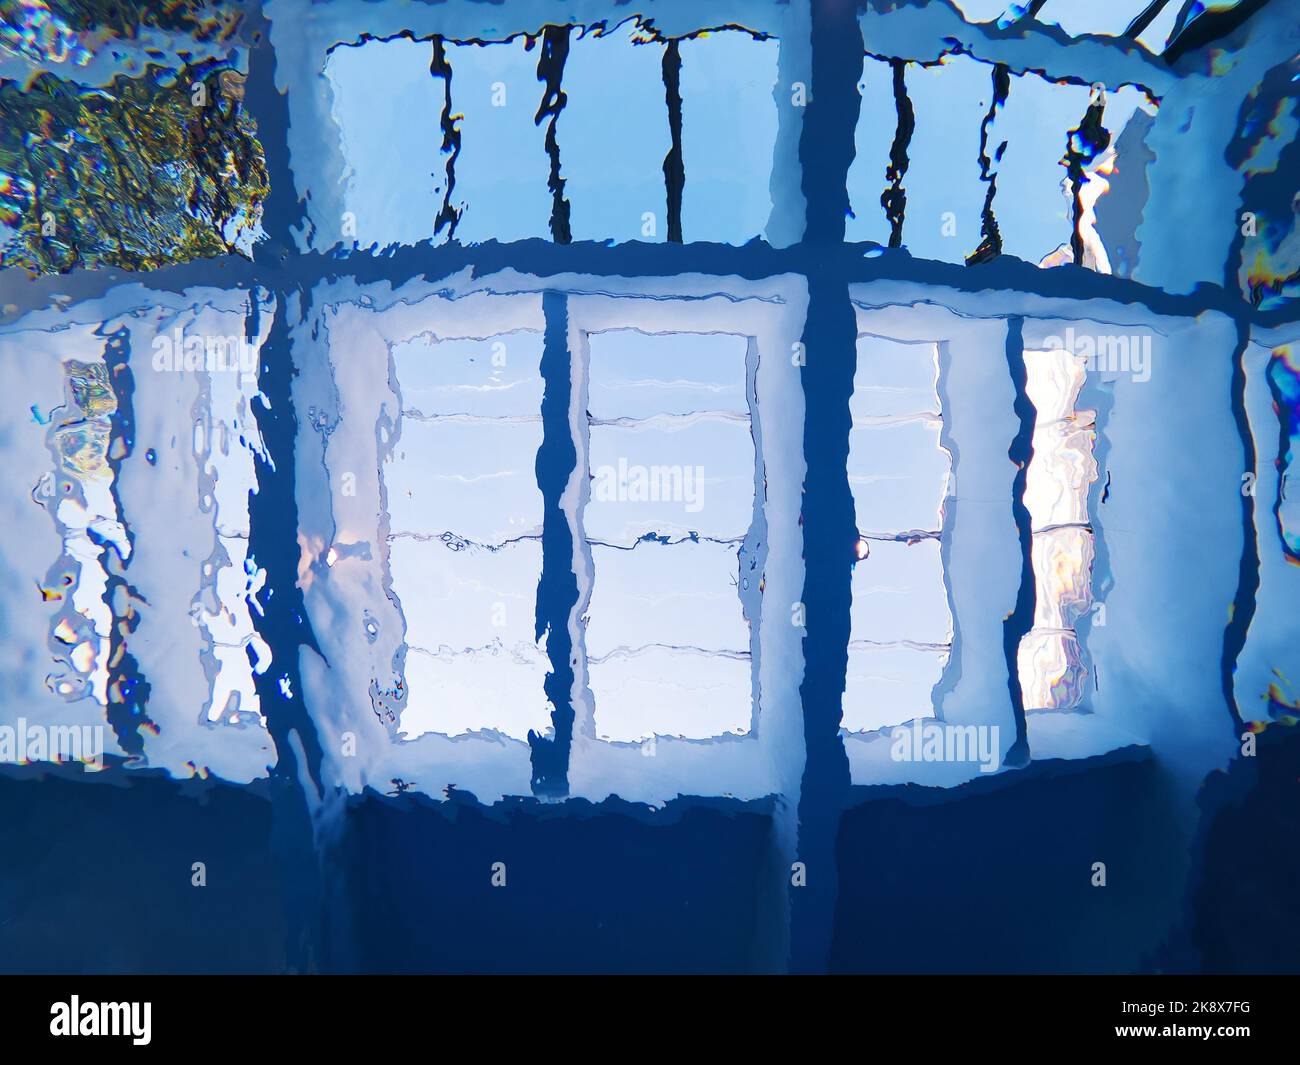 Glass roof of indoor swimming pool seen from underwater through rippled water surface as abstract background Stock Photo